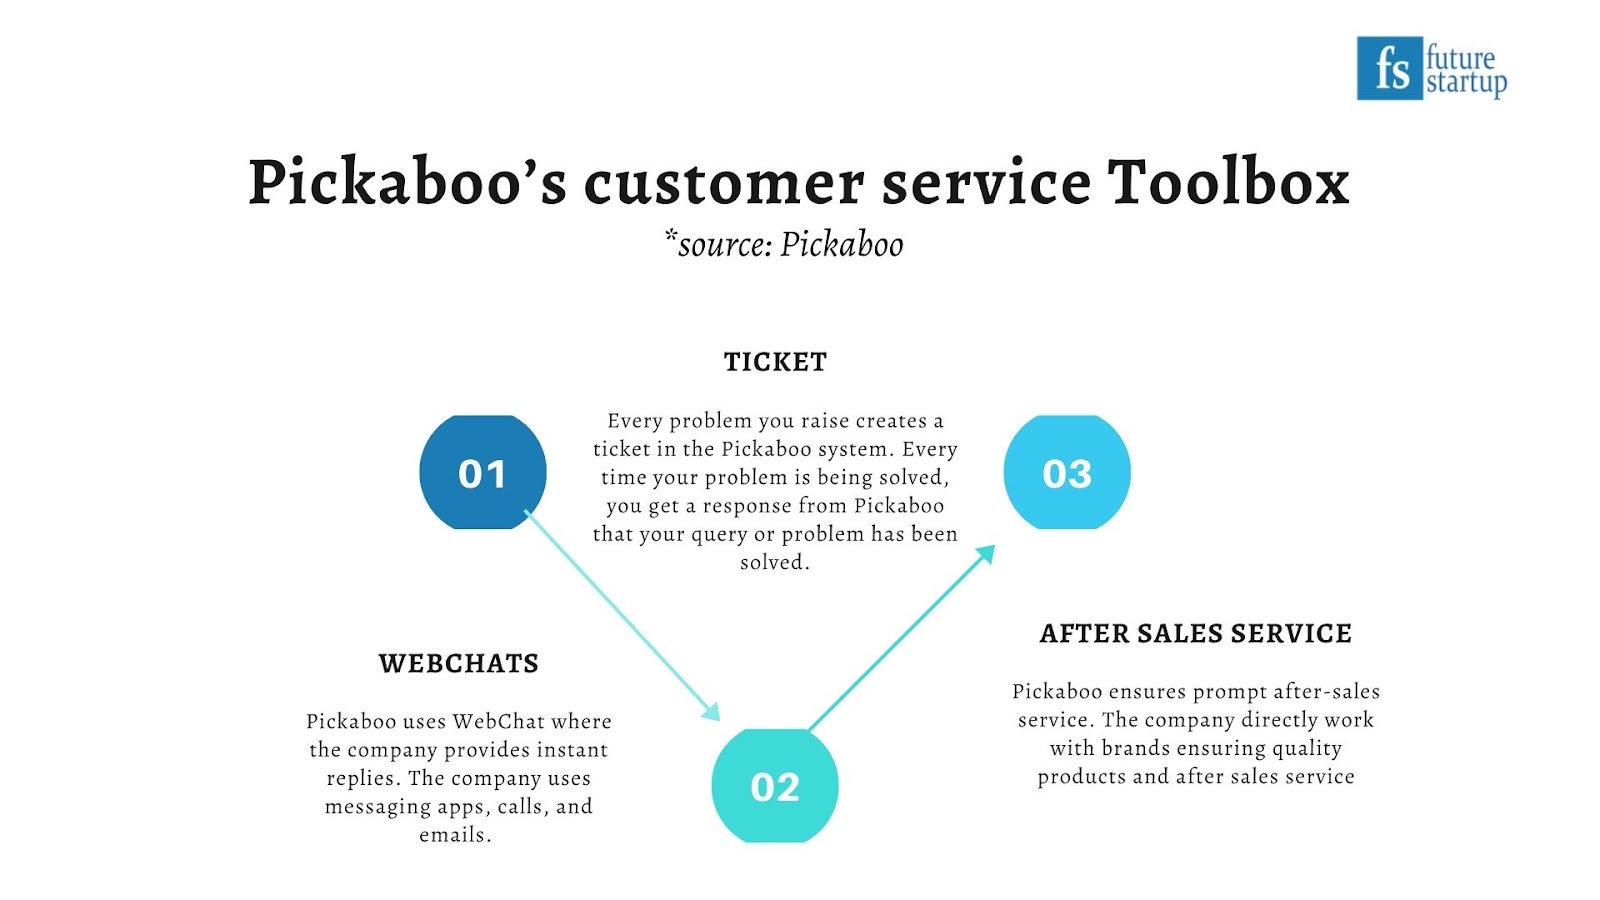 Pickaboo Takes a Different Approach to Growth, Focuses on Customer Service and Trust Building 1